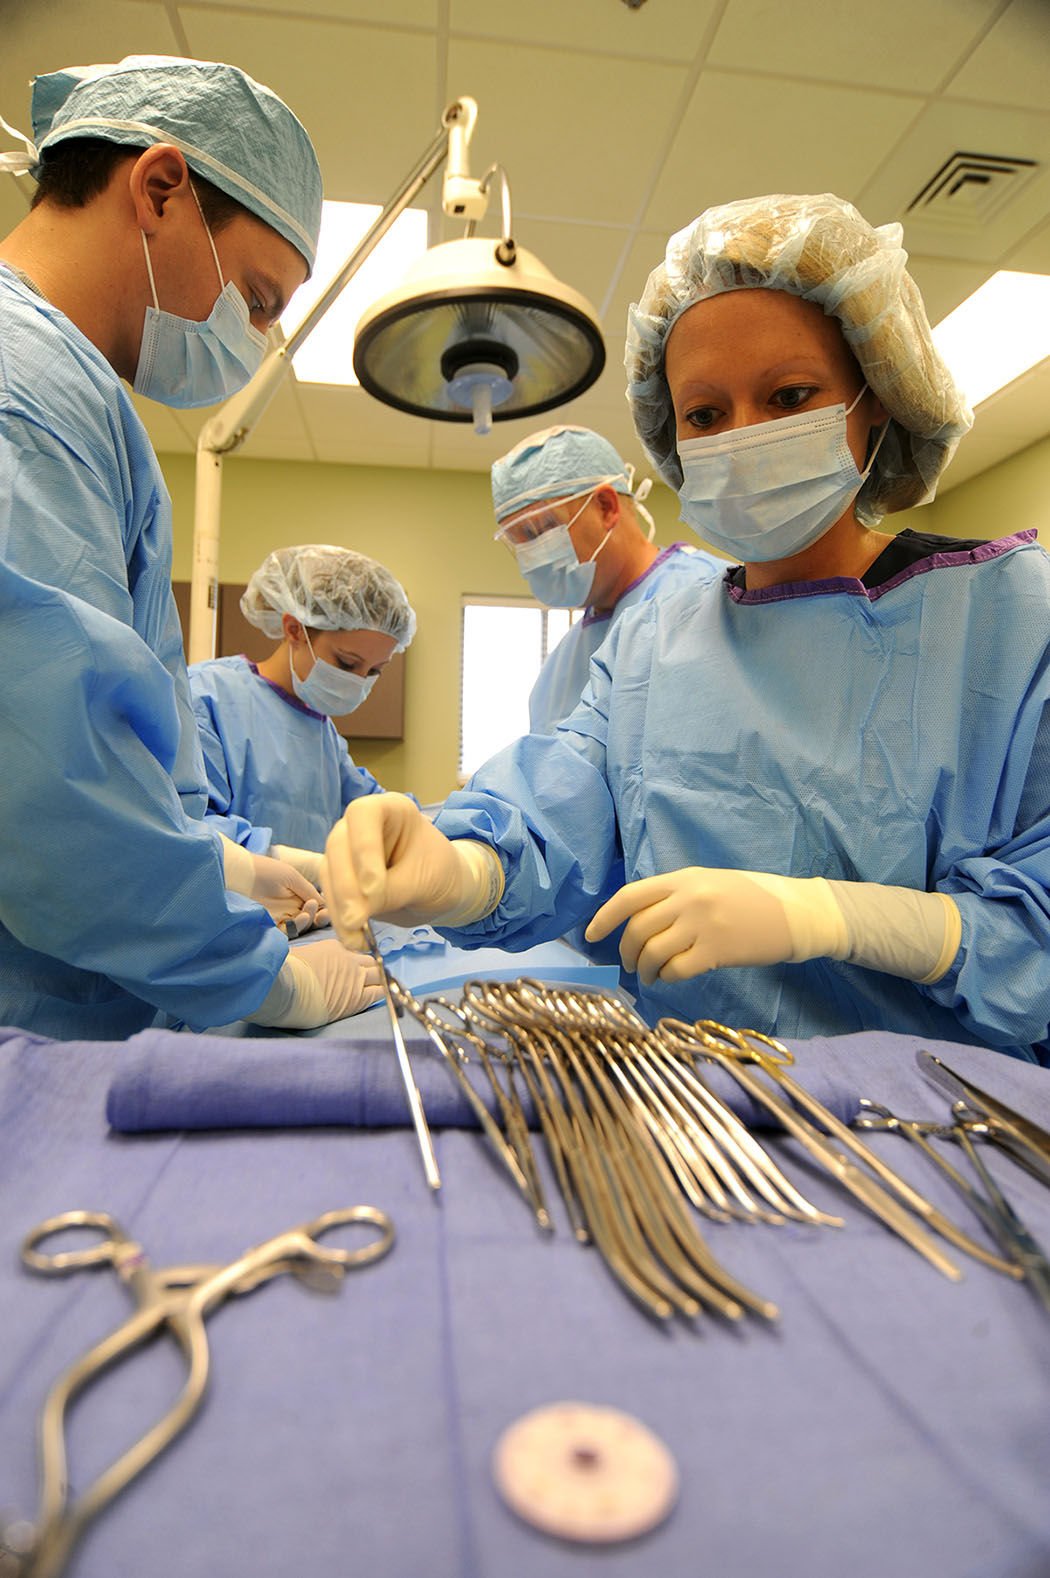 Students record 100 pass rate on Certified Surgical Technologist exam